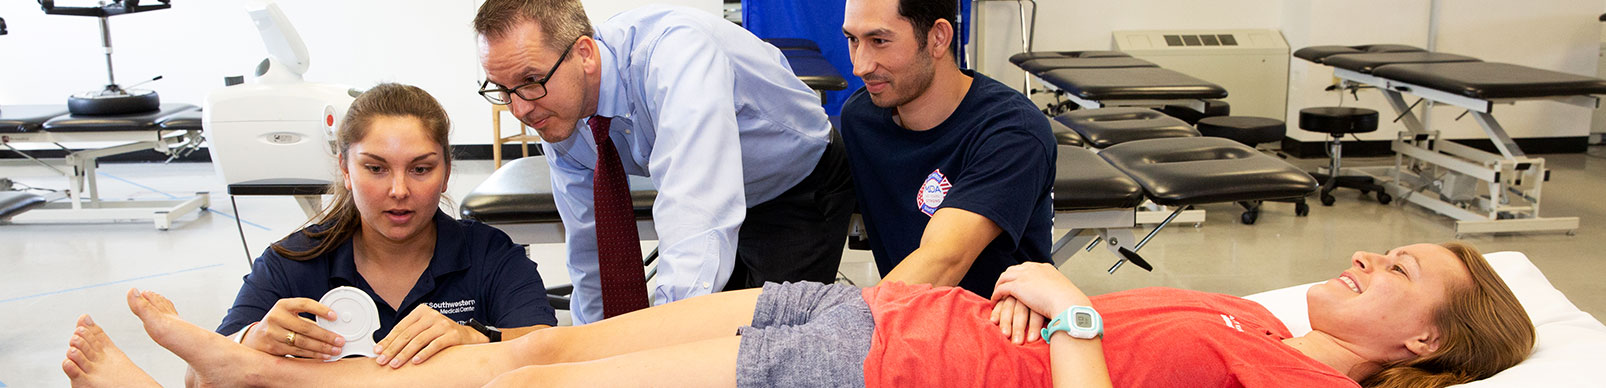 A student takes measurements on a patient's lower leg